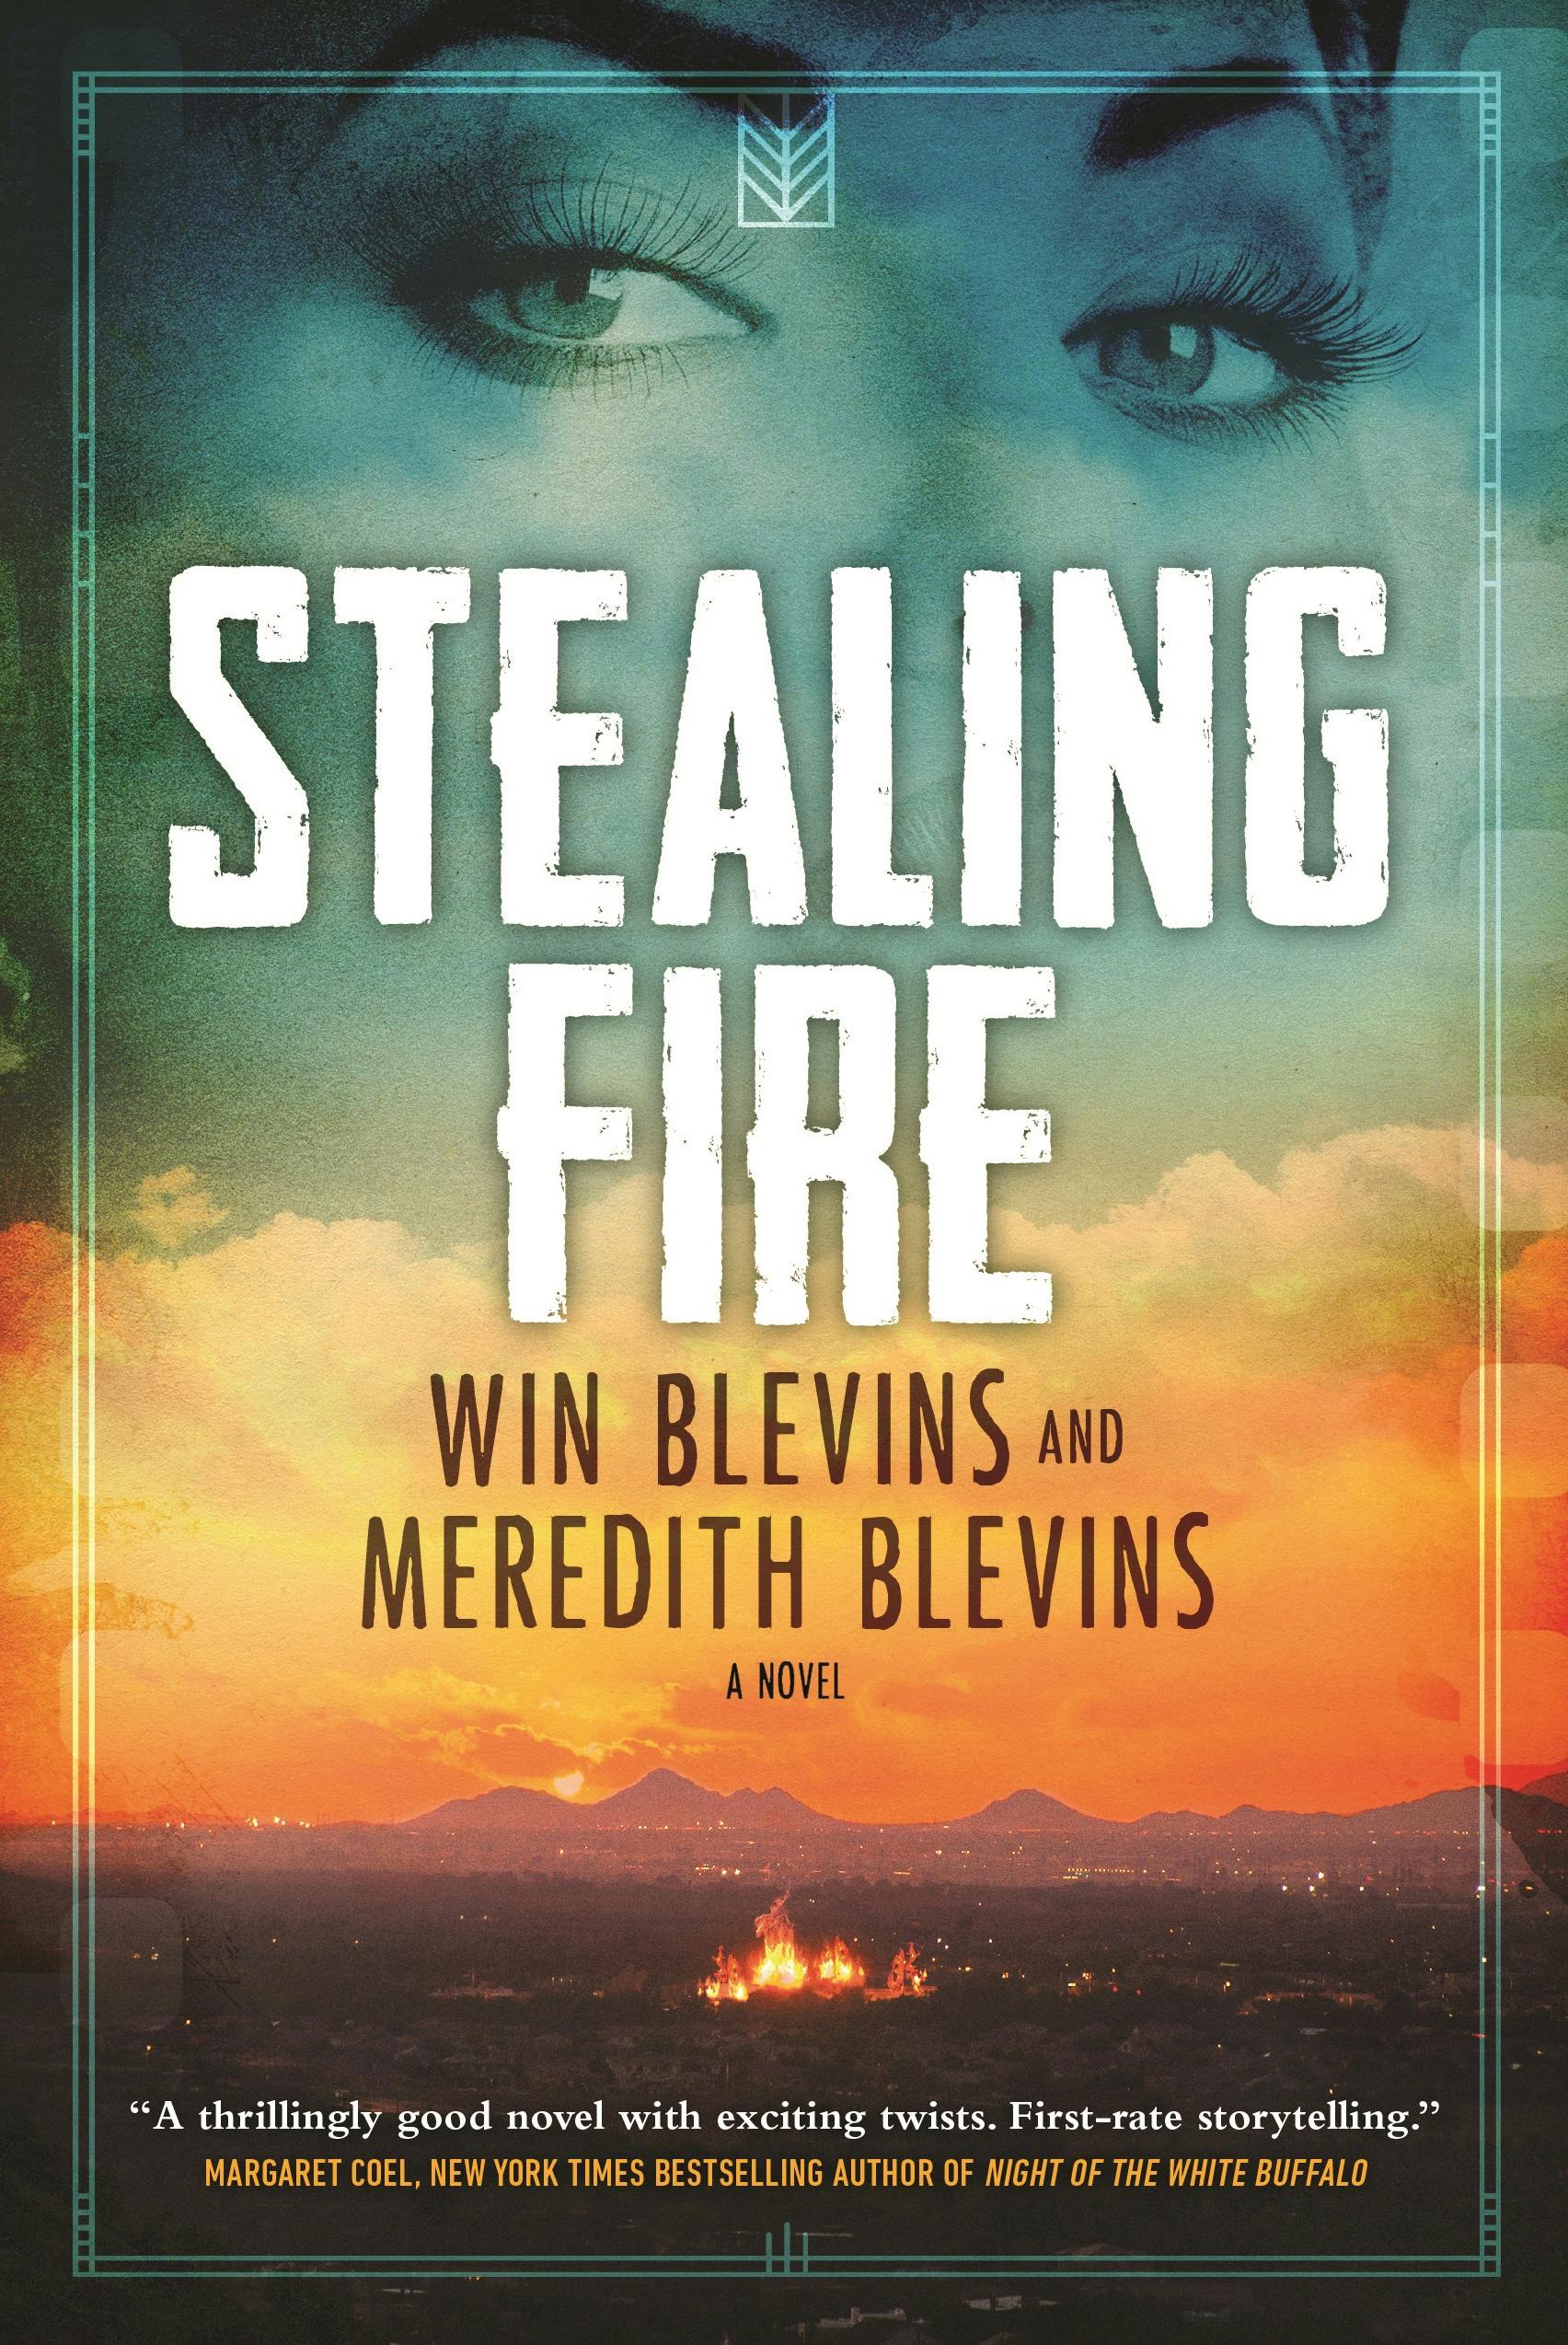 Cover for the book titled as: Stealing Fire